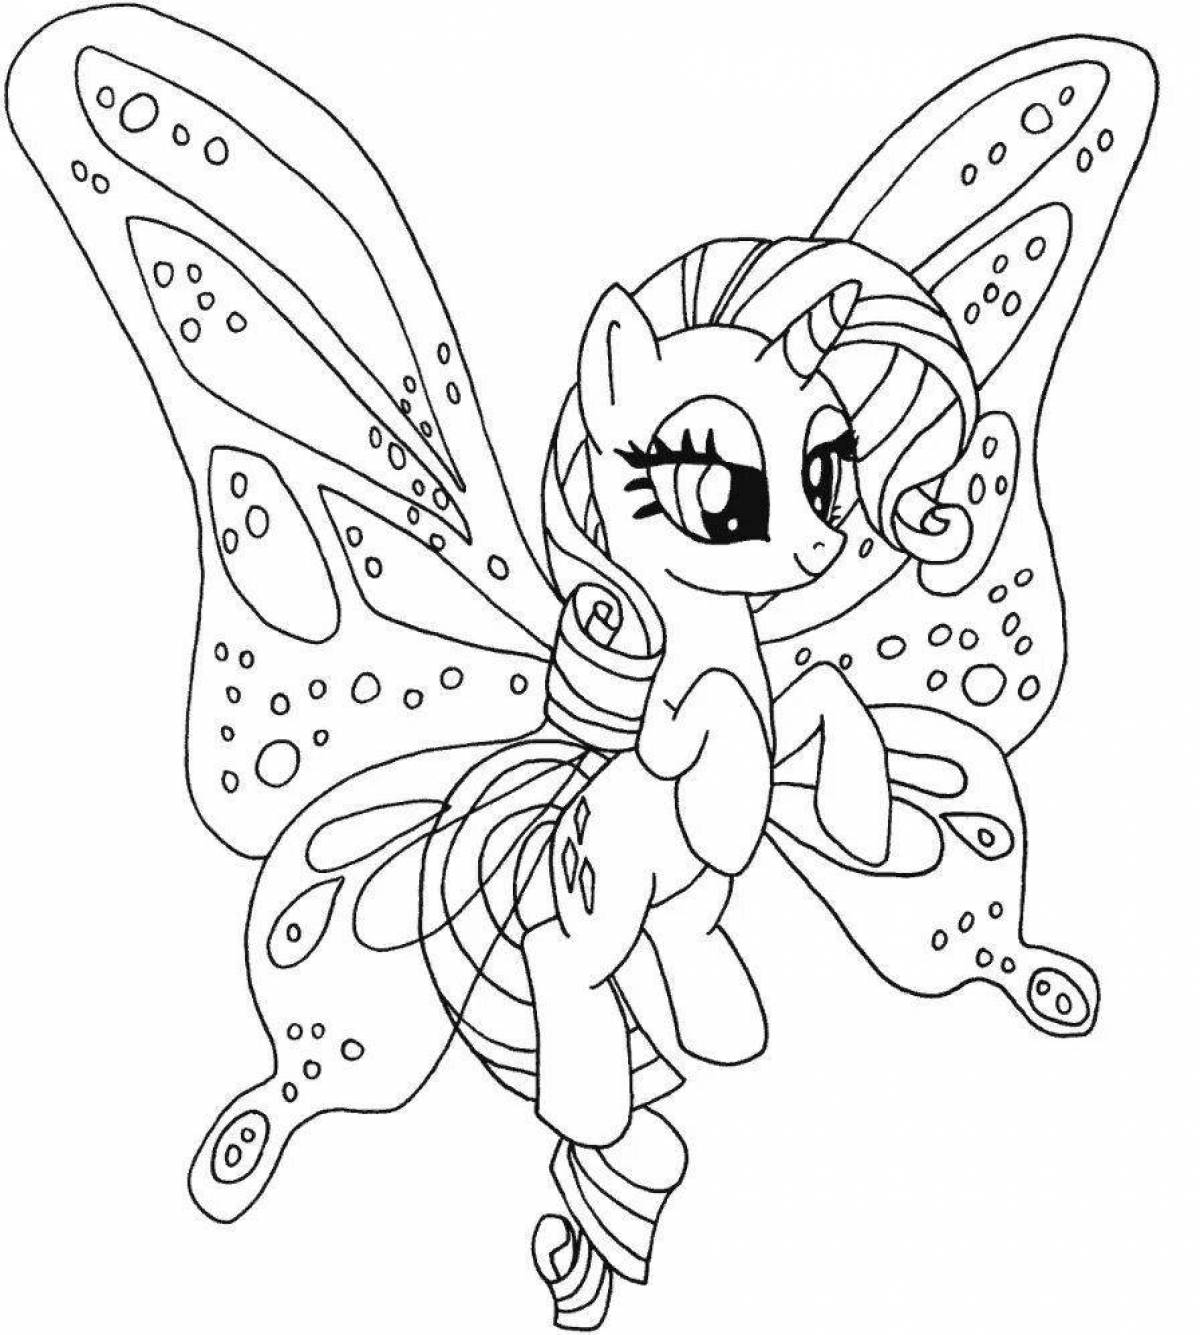 Fairytale pony coloring book